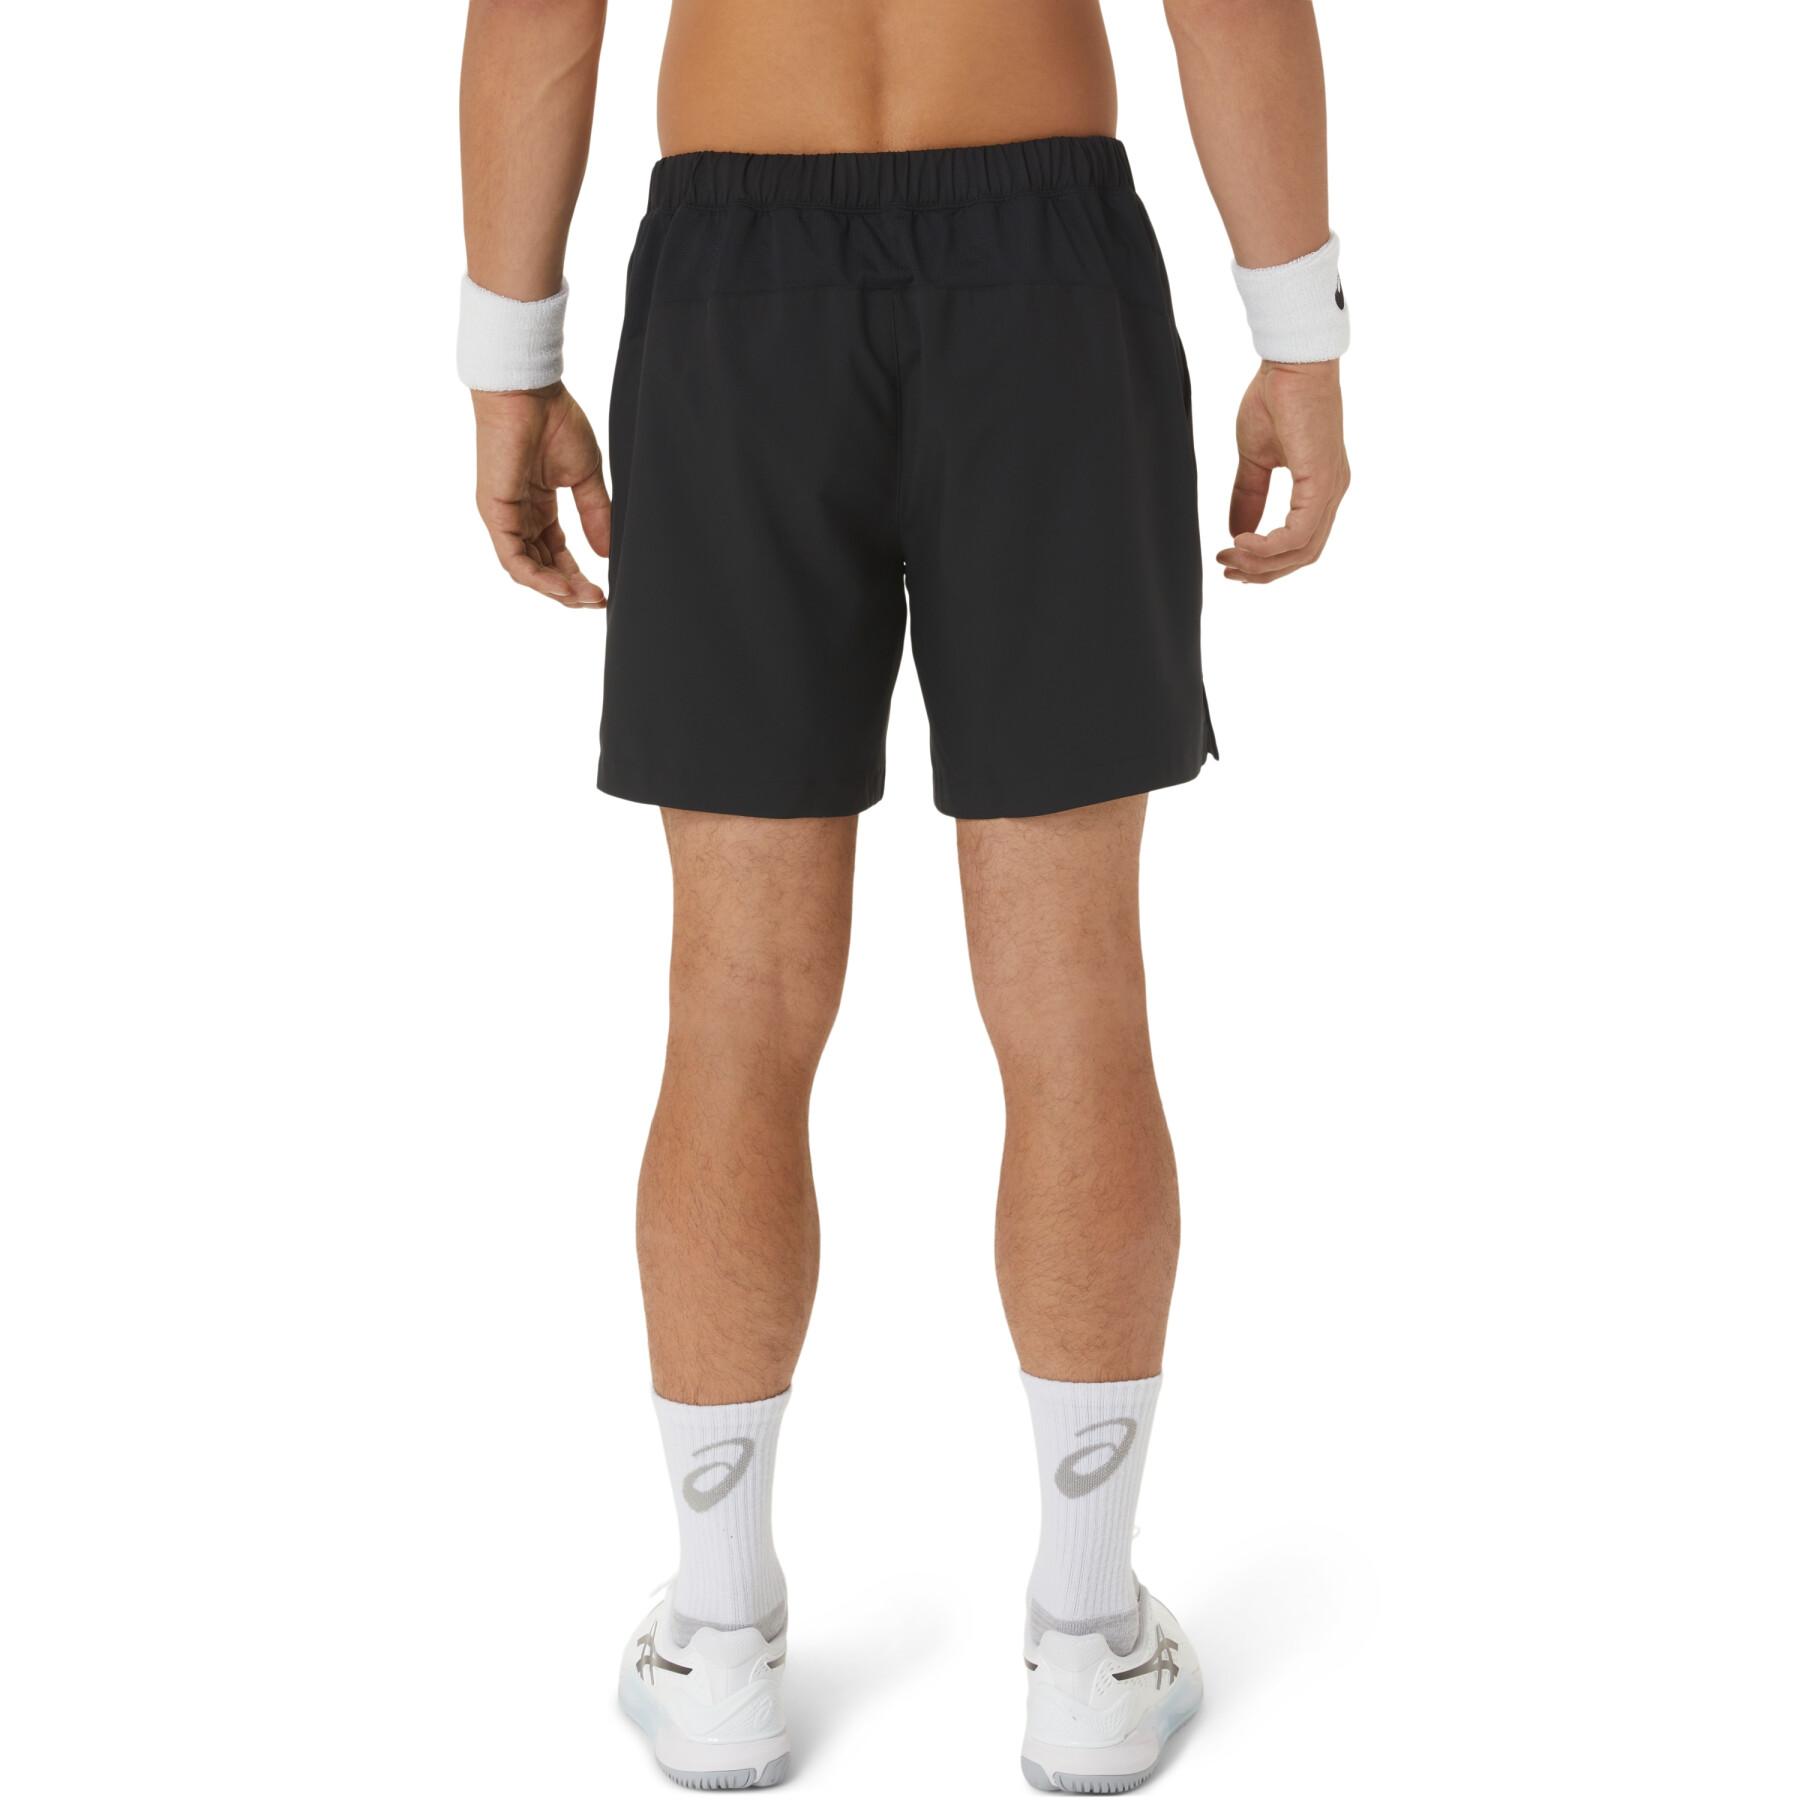 Shorts Asics Court 7 in